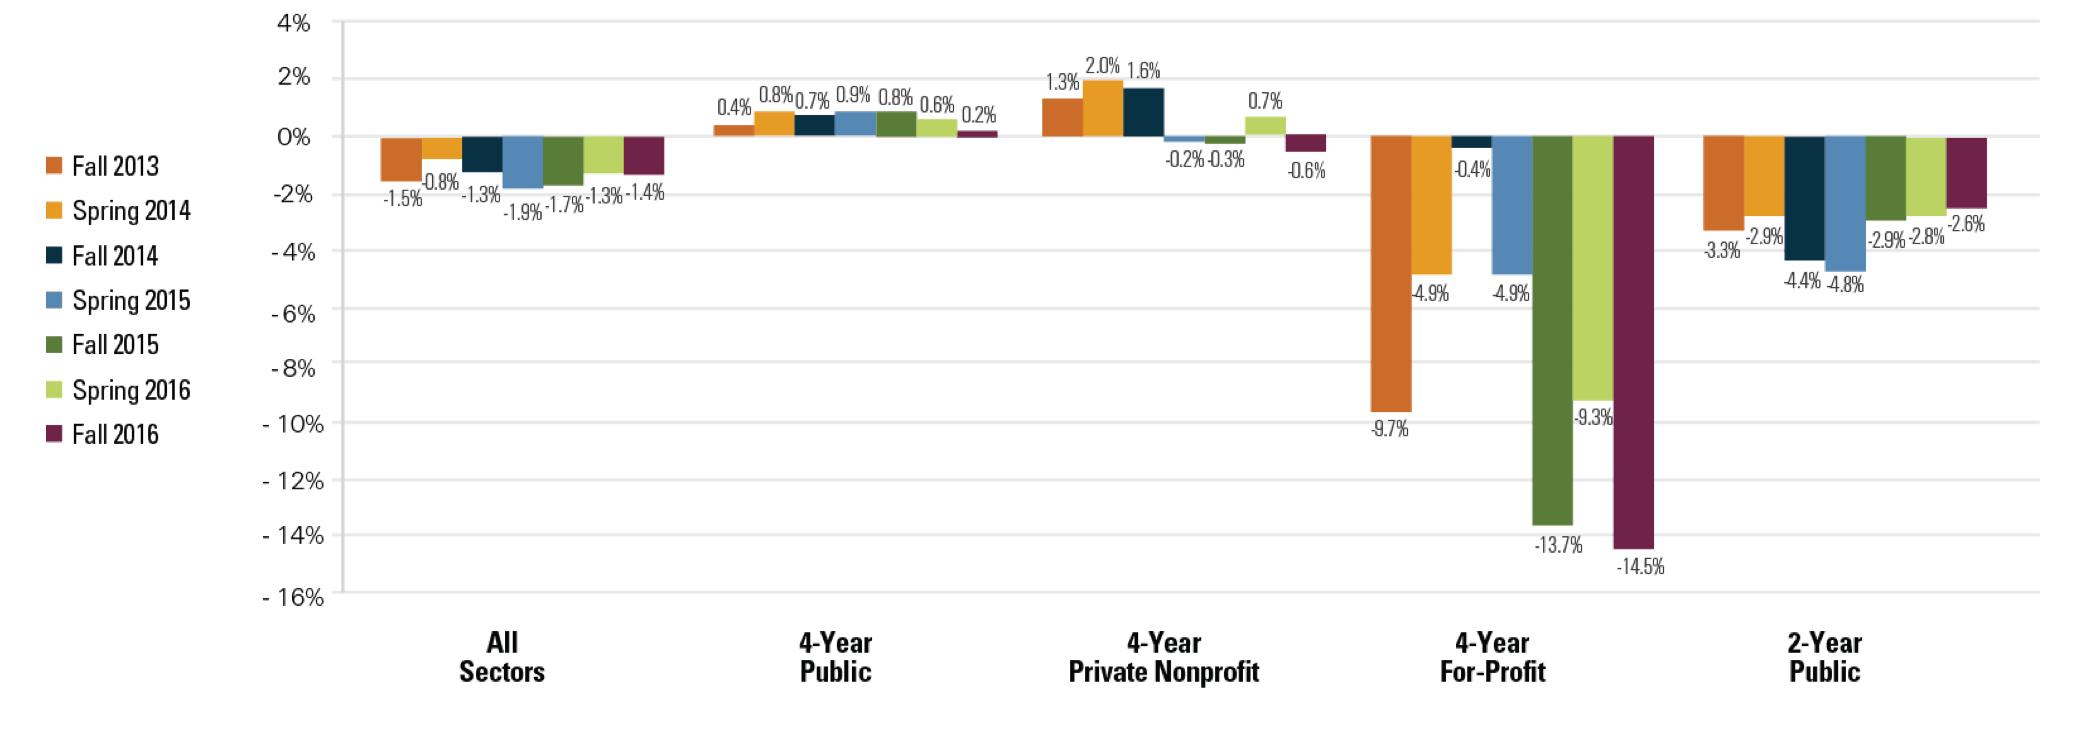 % Change from Previous Year, Enrollment by Sector (Title IV, Degree-Granting Institutions)